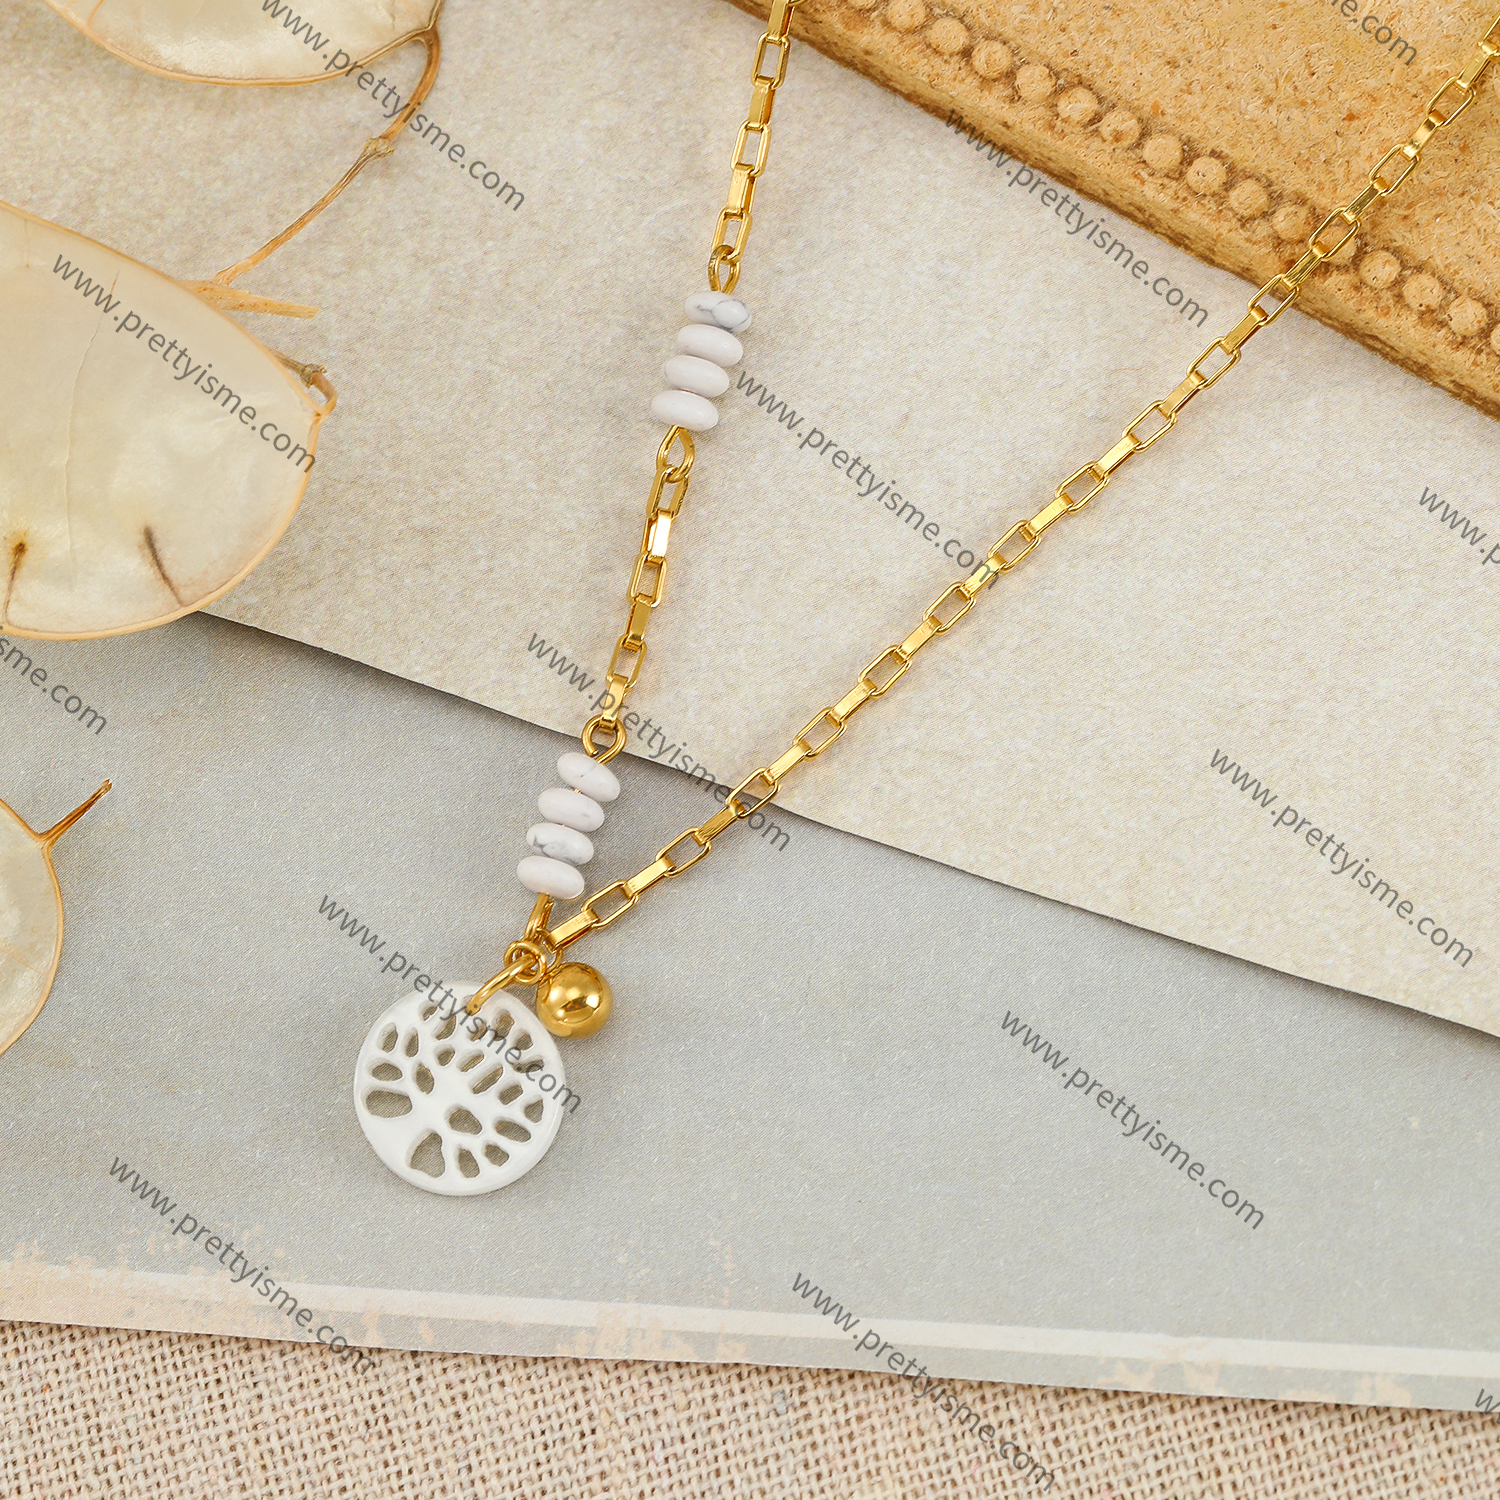 Tree of Life Pendant Necklace Stainless Steel Gold Plated 18k with White Beads (4).webp